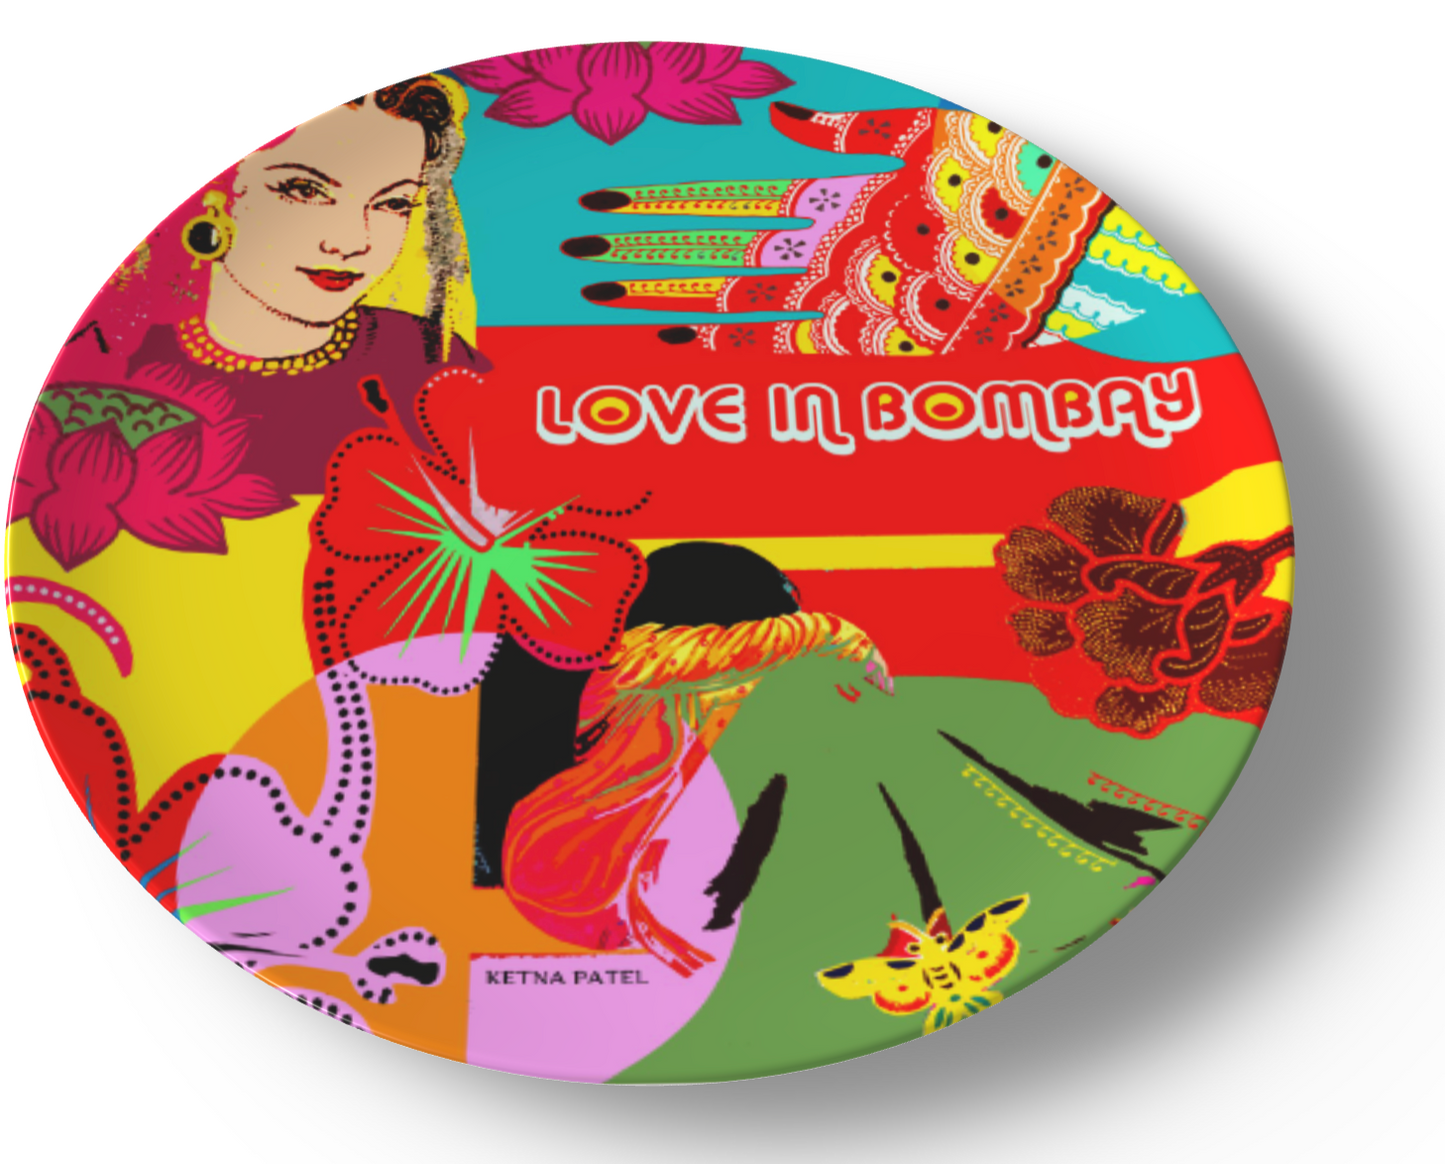 'Love in Bombay' ceramic dinner plate (Bollywood collection)